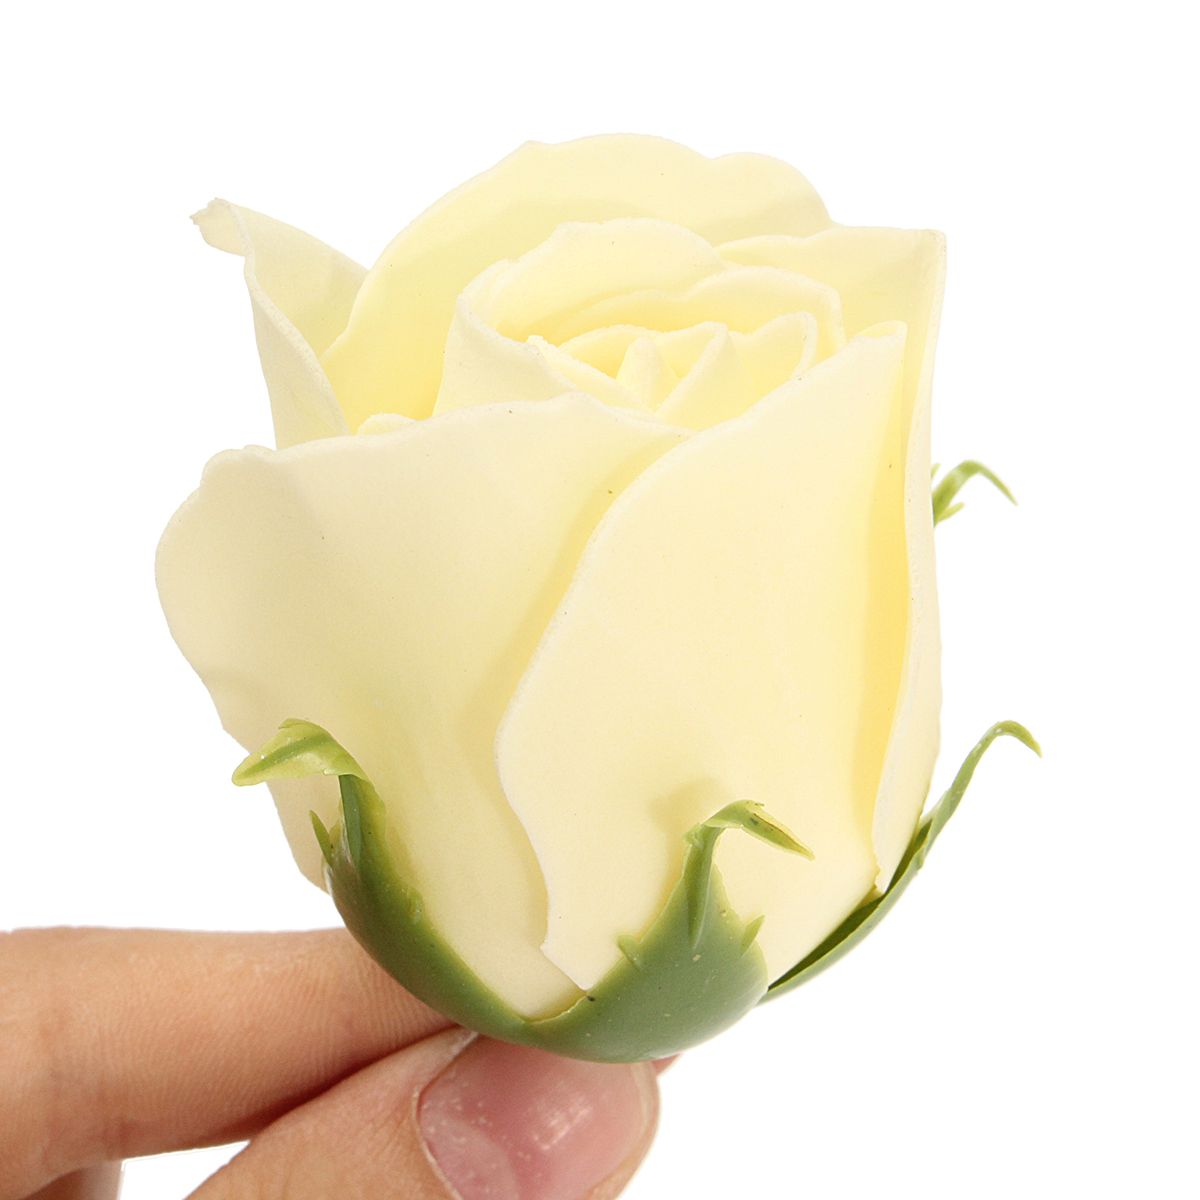 Simulation-Artificial-Rose-Soap-Flower-For-Wedding-Party-Home-Decoration-Valentines-Day-Gift-1069981